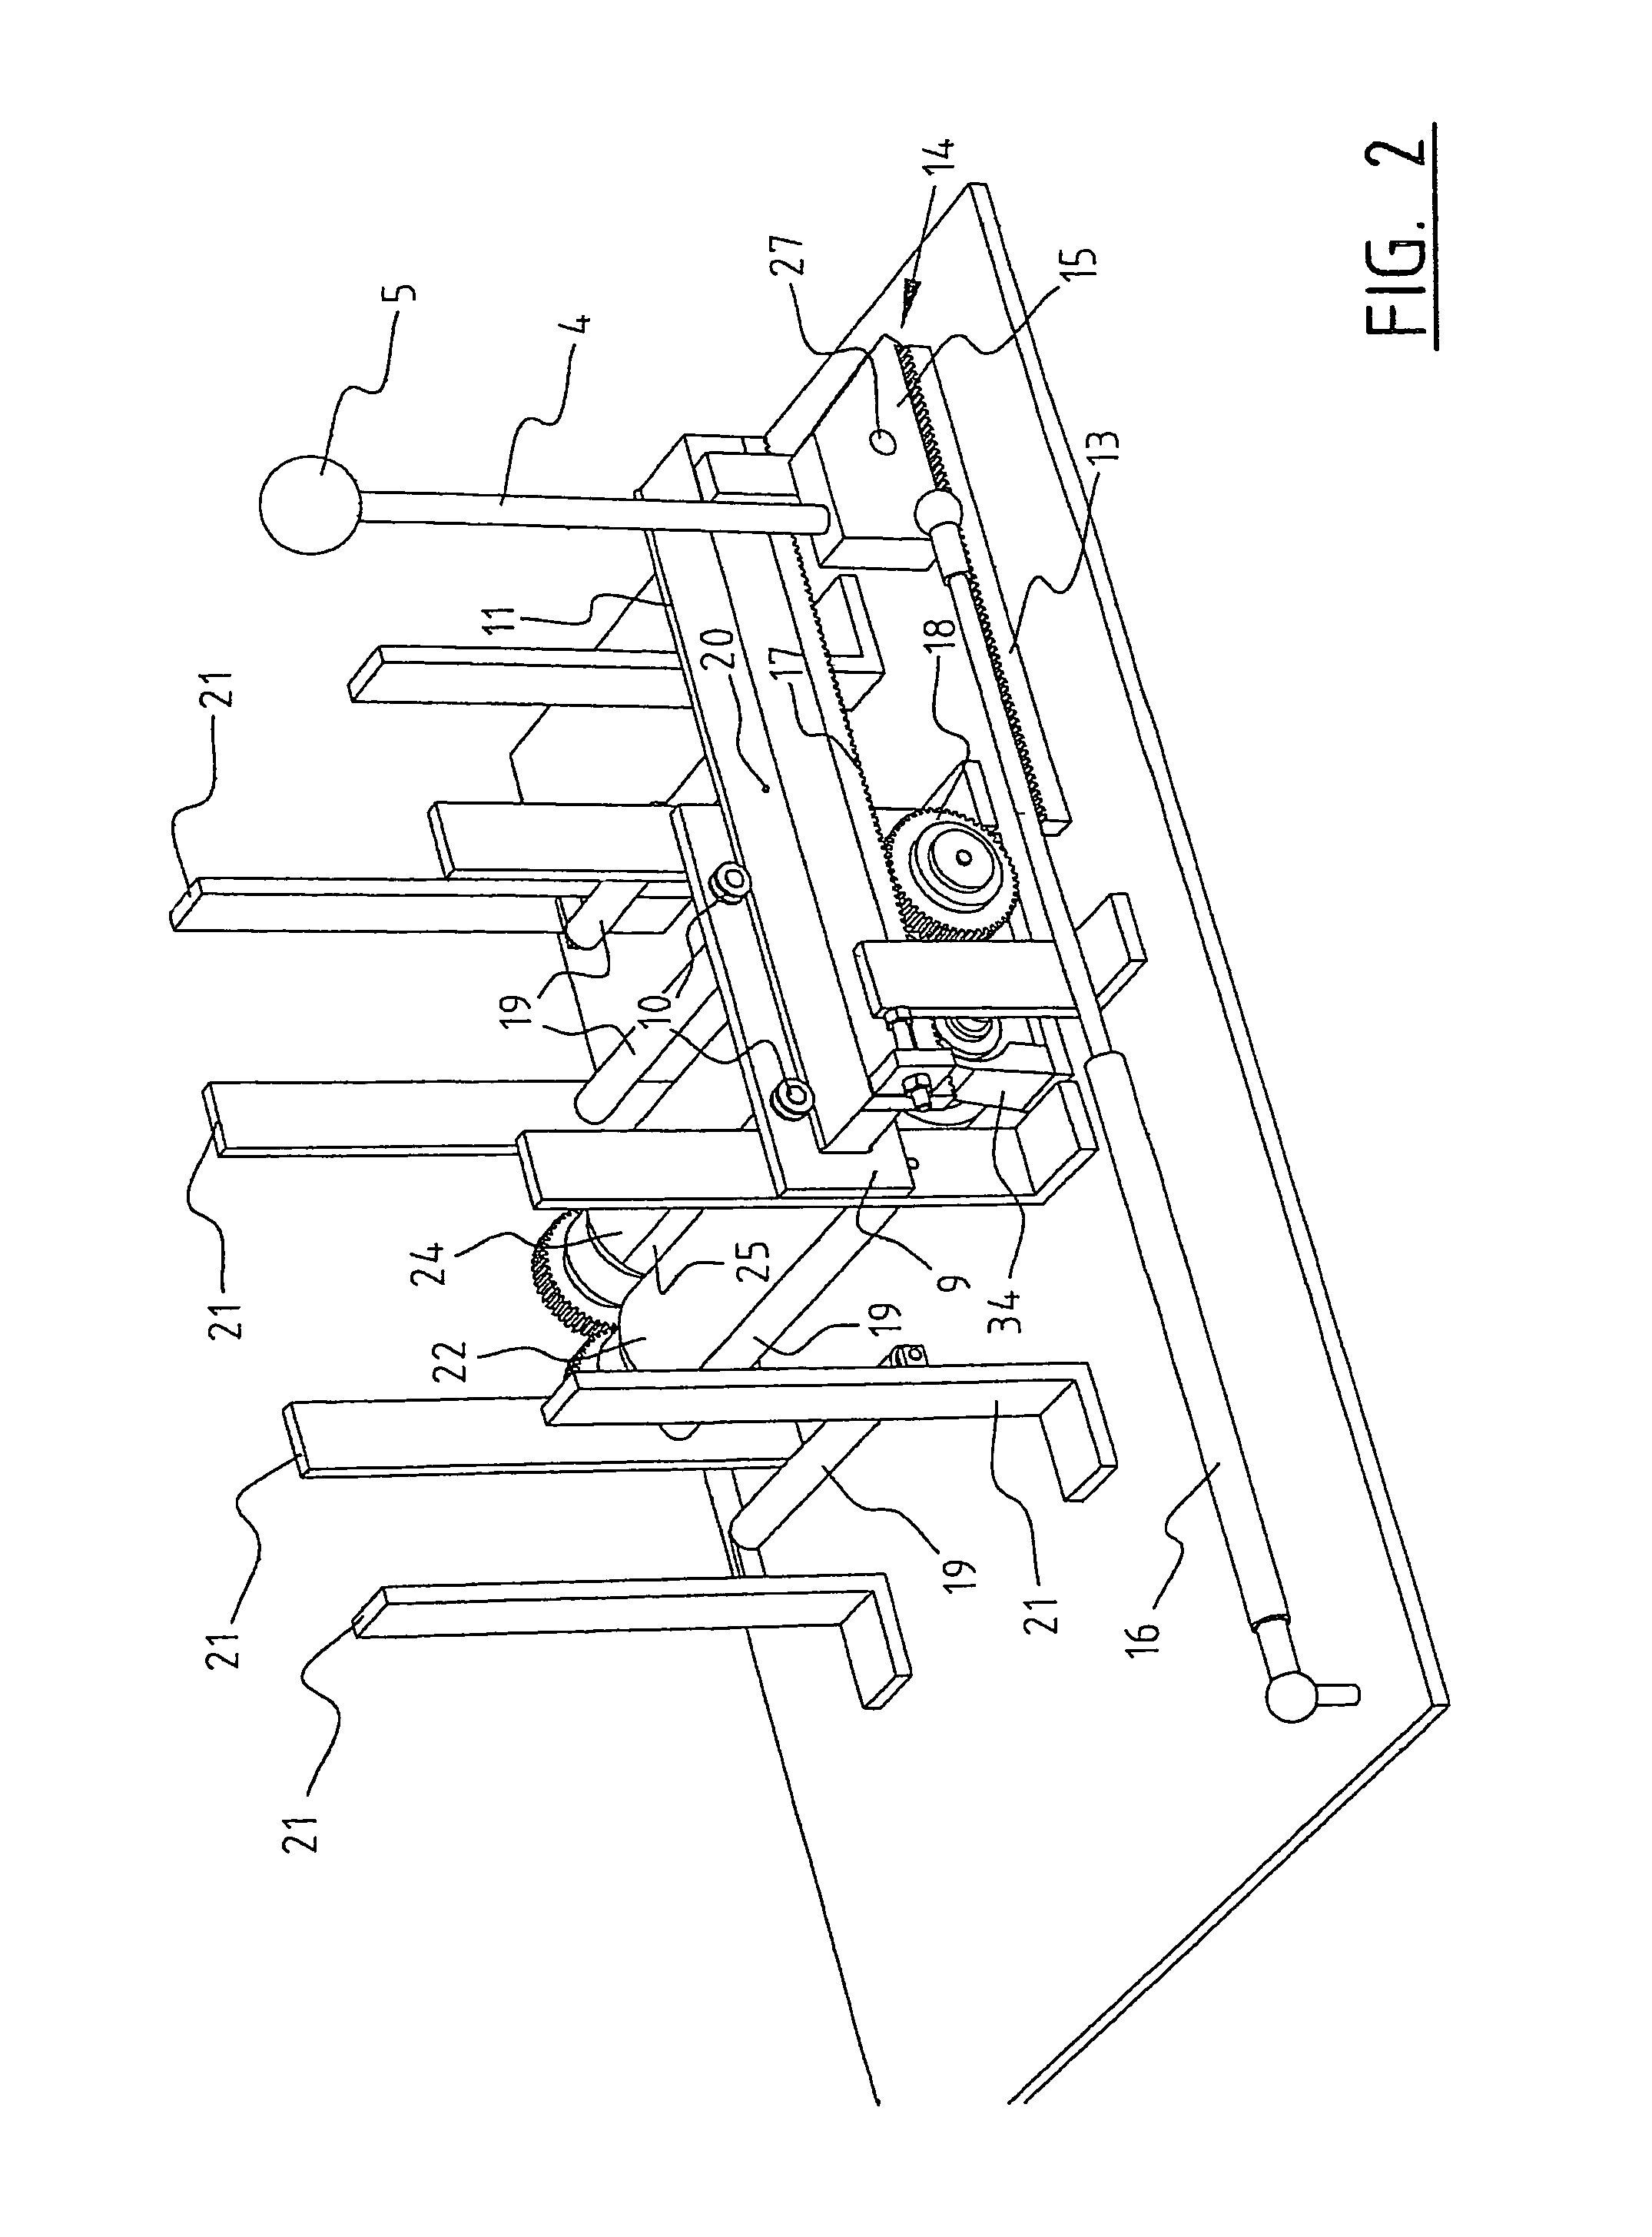 Apparatus and method for dispensing and folding of sheets from a stack